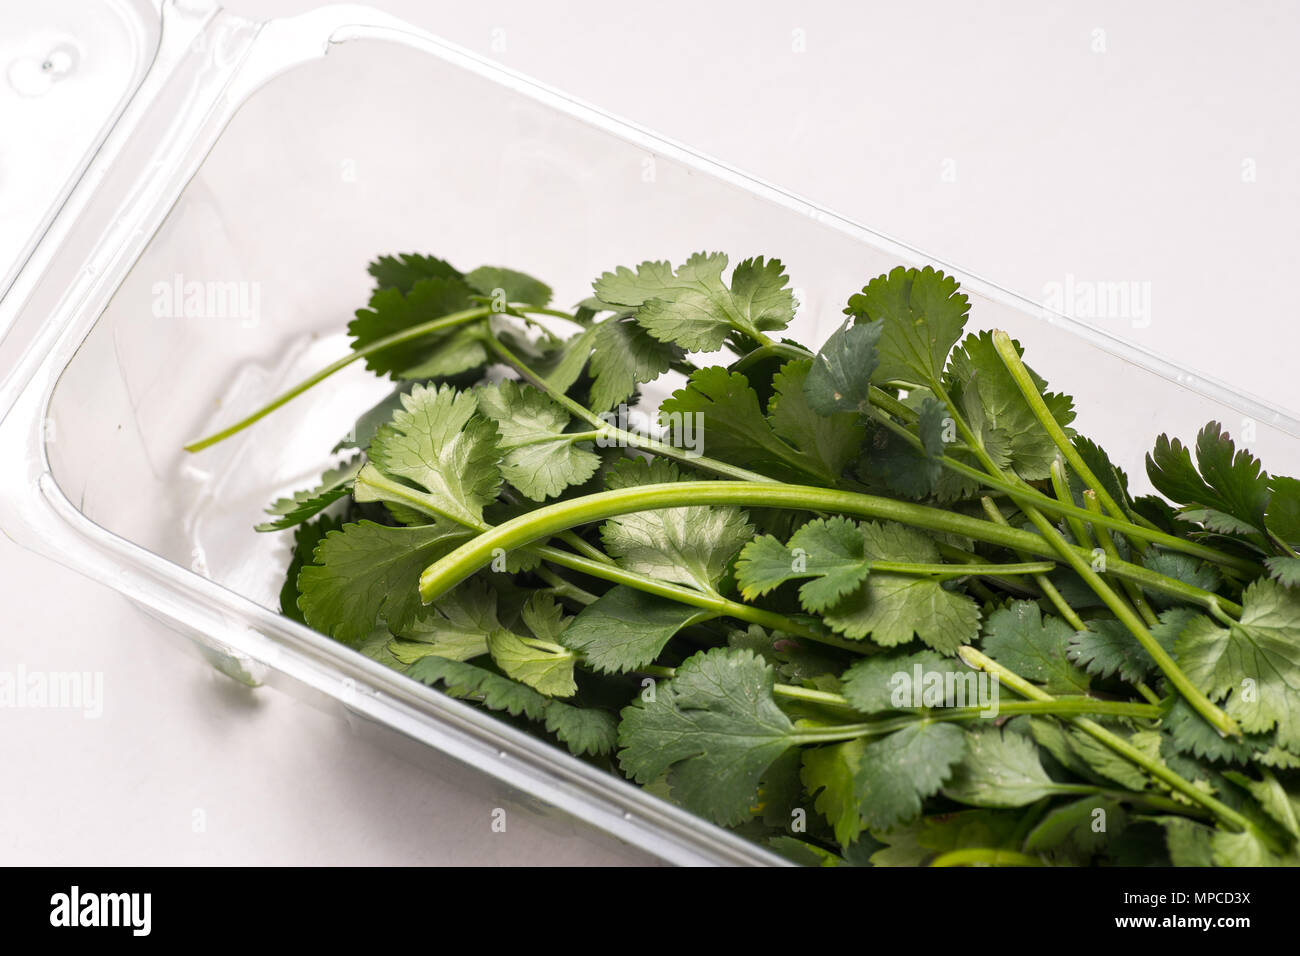 Organic green Parsley in Plastic container isolated on white Stock Photo